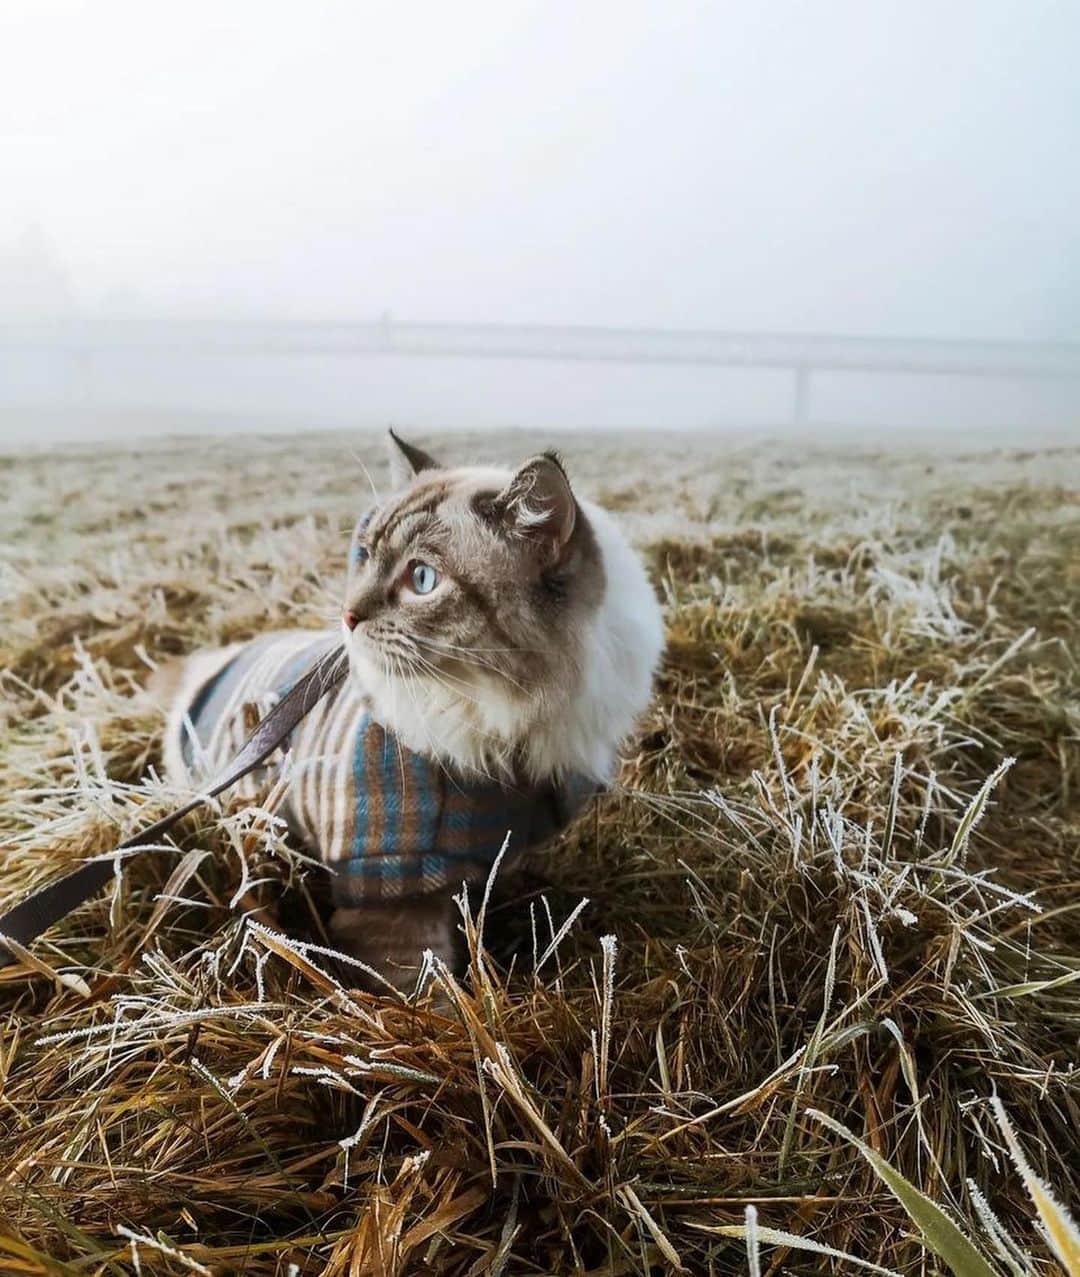 Bolt and Keelのインスタグラム：「Meet Royce! 🌾 This Ragdoll kitty is on a mission to explore the world 🗺️   @adventrapets ➡️ @royce_the_cat_  —————————————————— Follow @adventrapets to meet cute, brave and inspiring adventure pets from all over the world! 🌲🐶🐱🌲  • TAG US IN YOUR POSTS to get your little adventurer featured! #adventrapets ——————————————————」